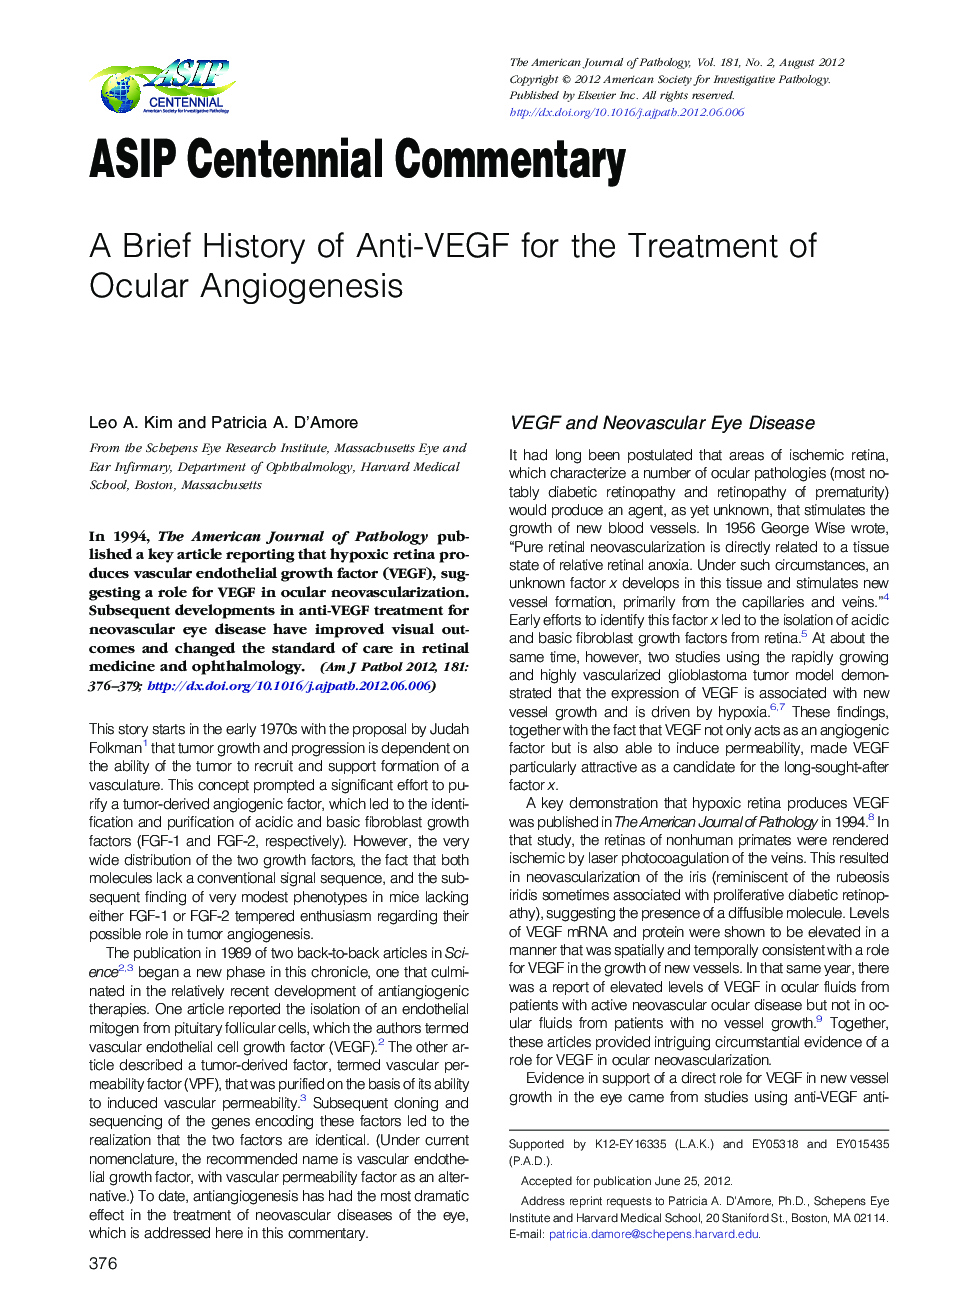 A Brief History of Anti-VEGF for the Treatment of Ocular Angiogenesis